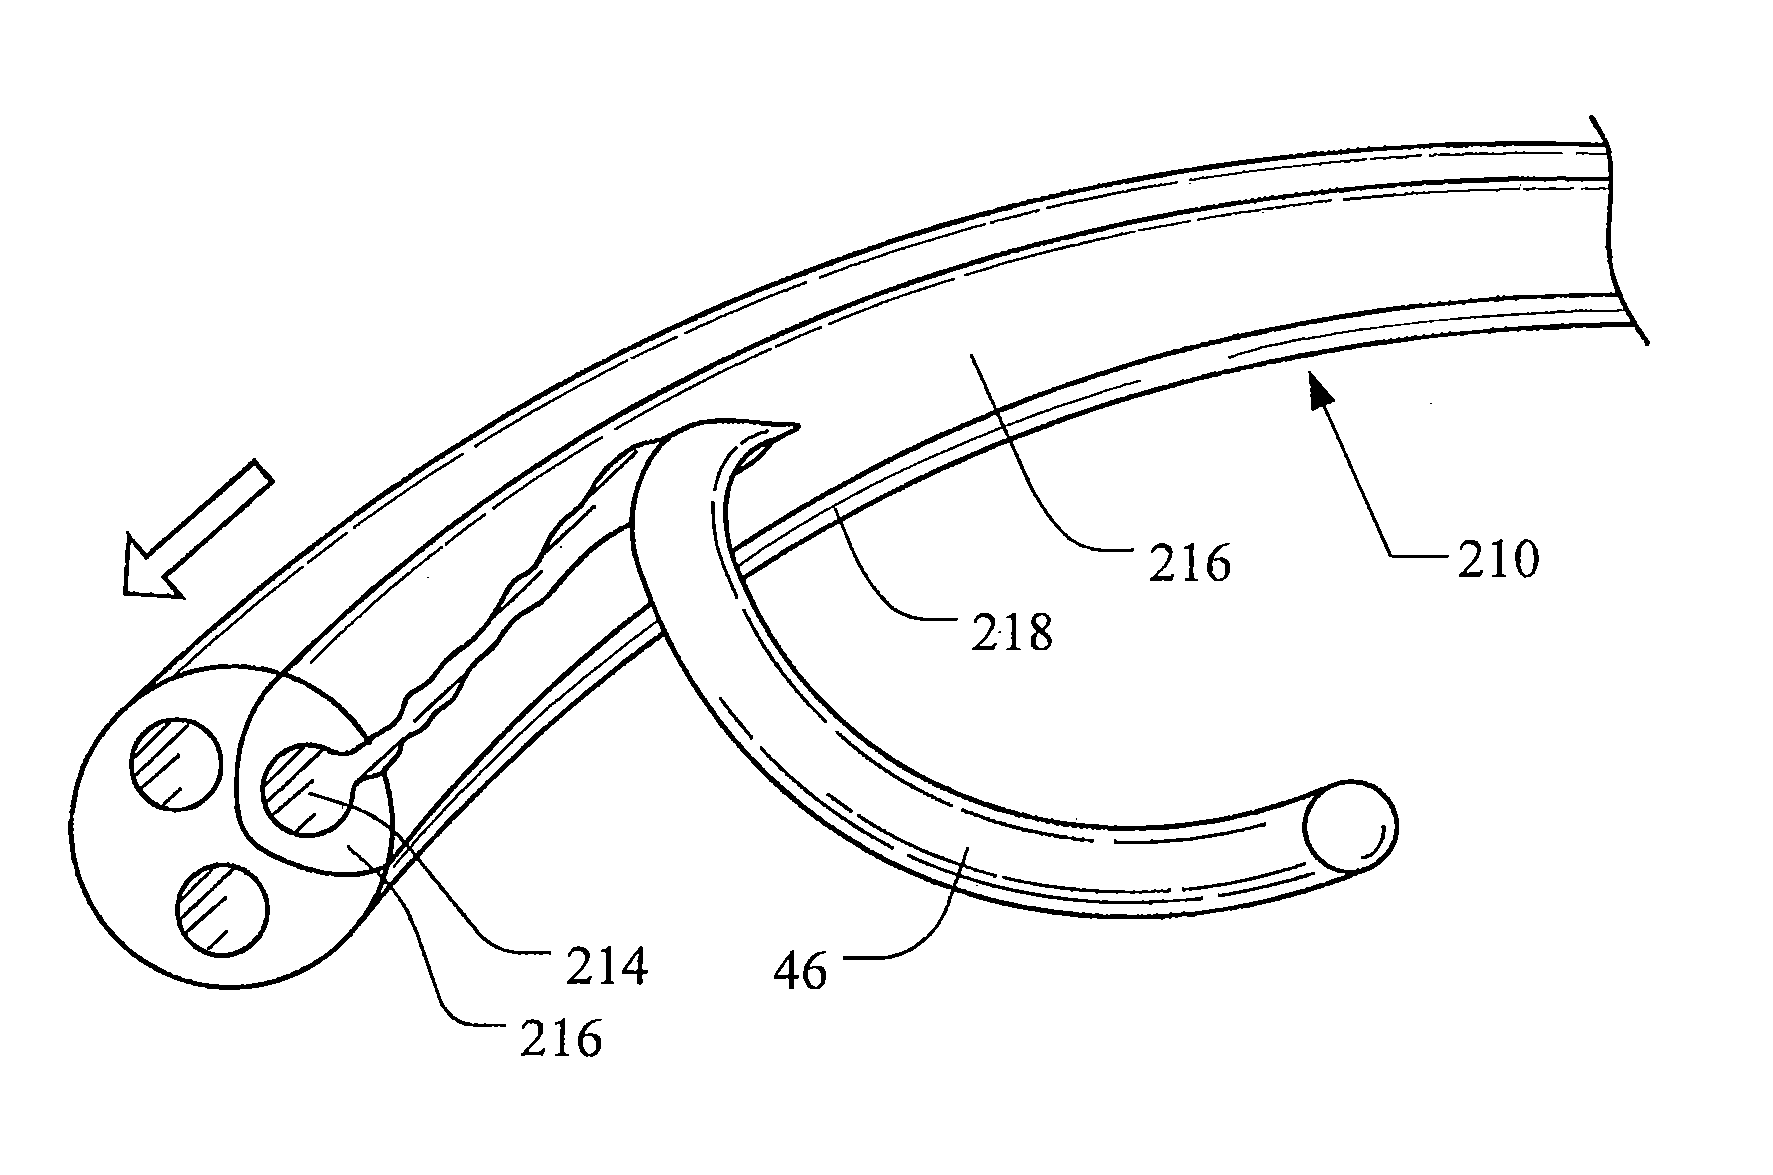 Catheter with splittable wall shaft and peel tool